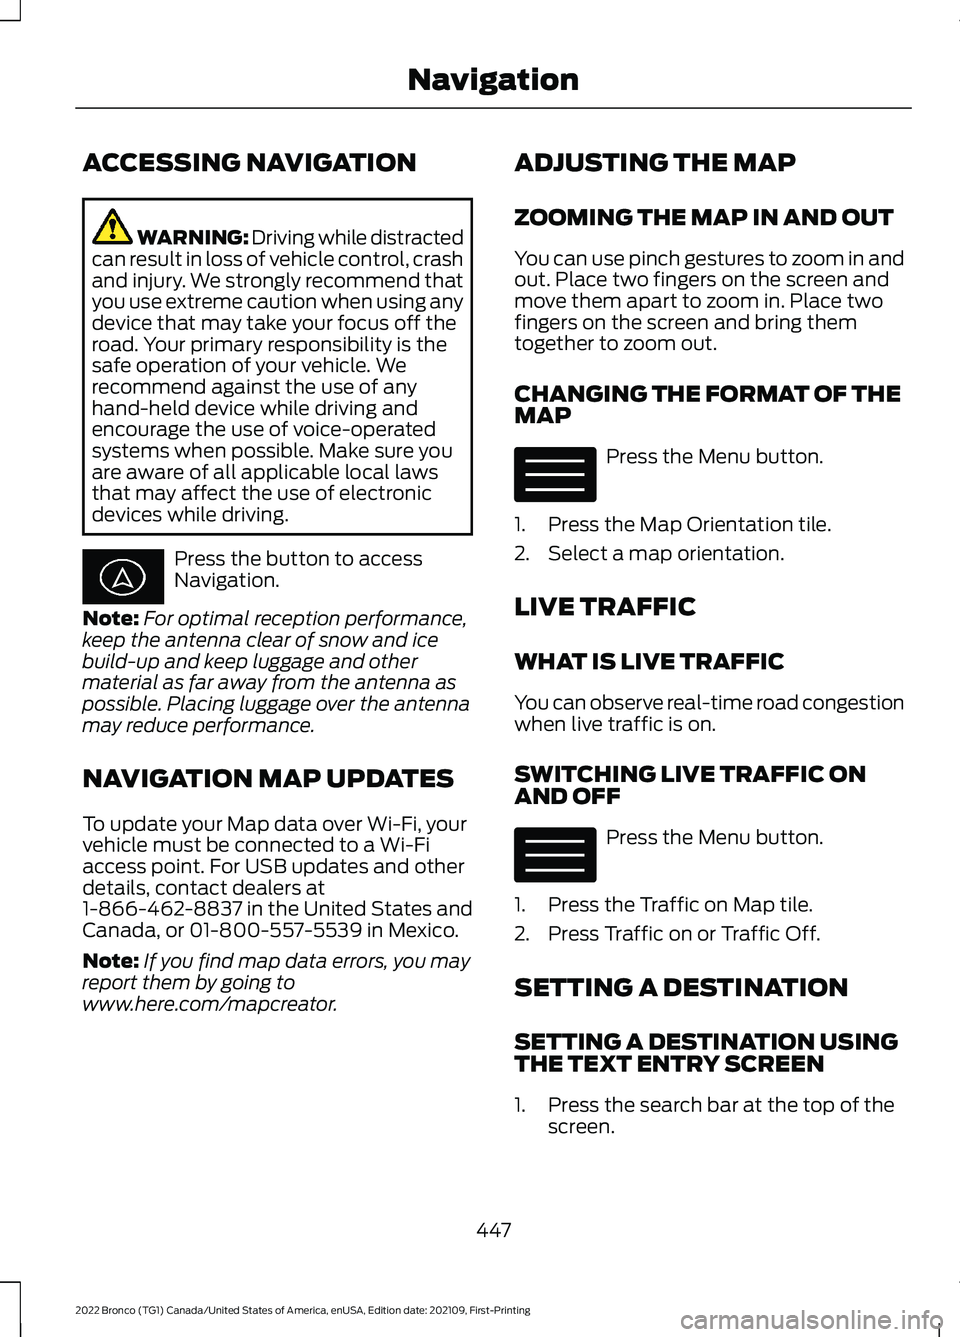 FORD BRONCO 2022  Owners Manual ACCESSING NAVIGATION
WARNING: Driving while distractedcan result in loss of vehicle control, crashand injury. We strongly recommend thatyou use extreme caution when using anydevice that may take your 